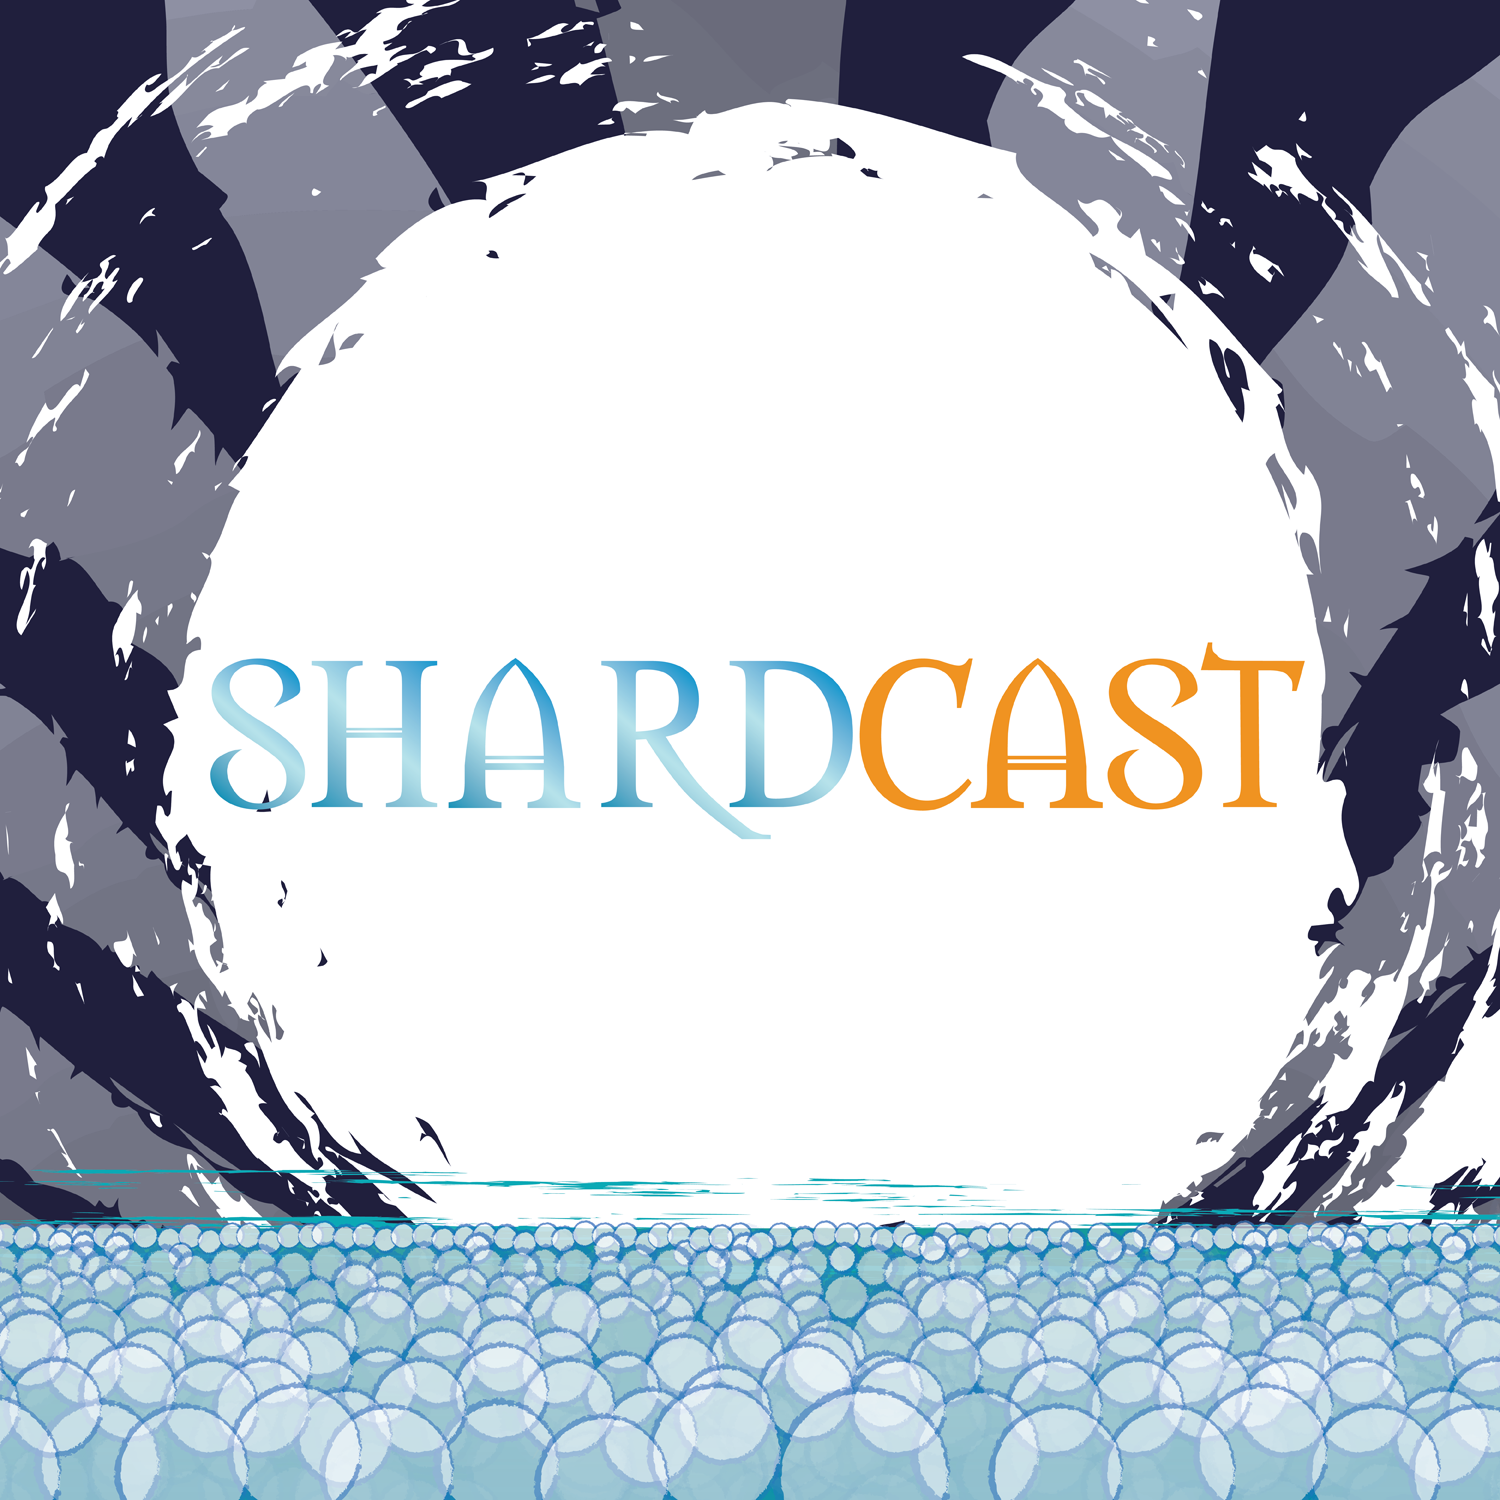 More information about "Shardcast: Chatting with Daniel Greene about Fantasy, Cosmere, and Rhythm of War!"